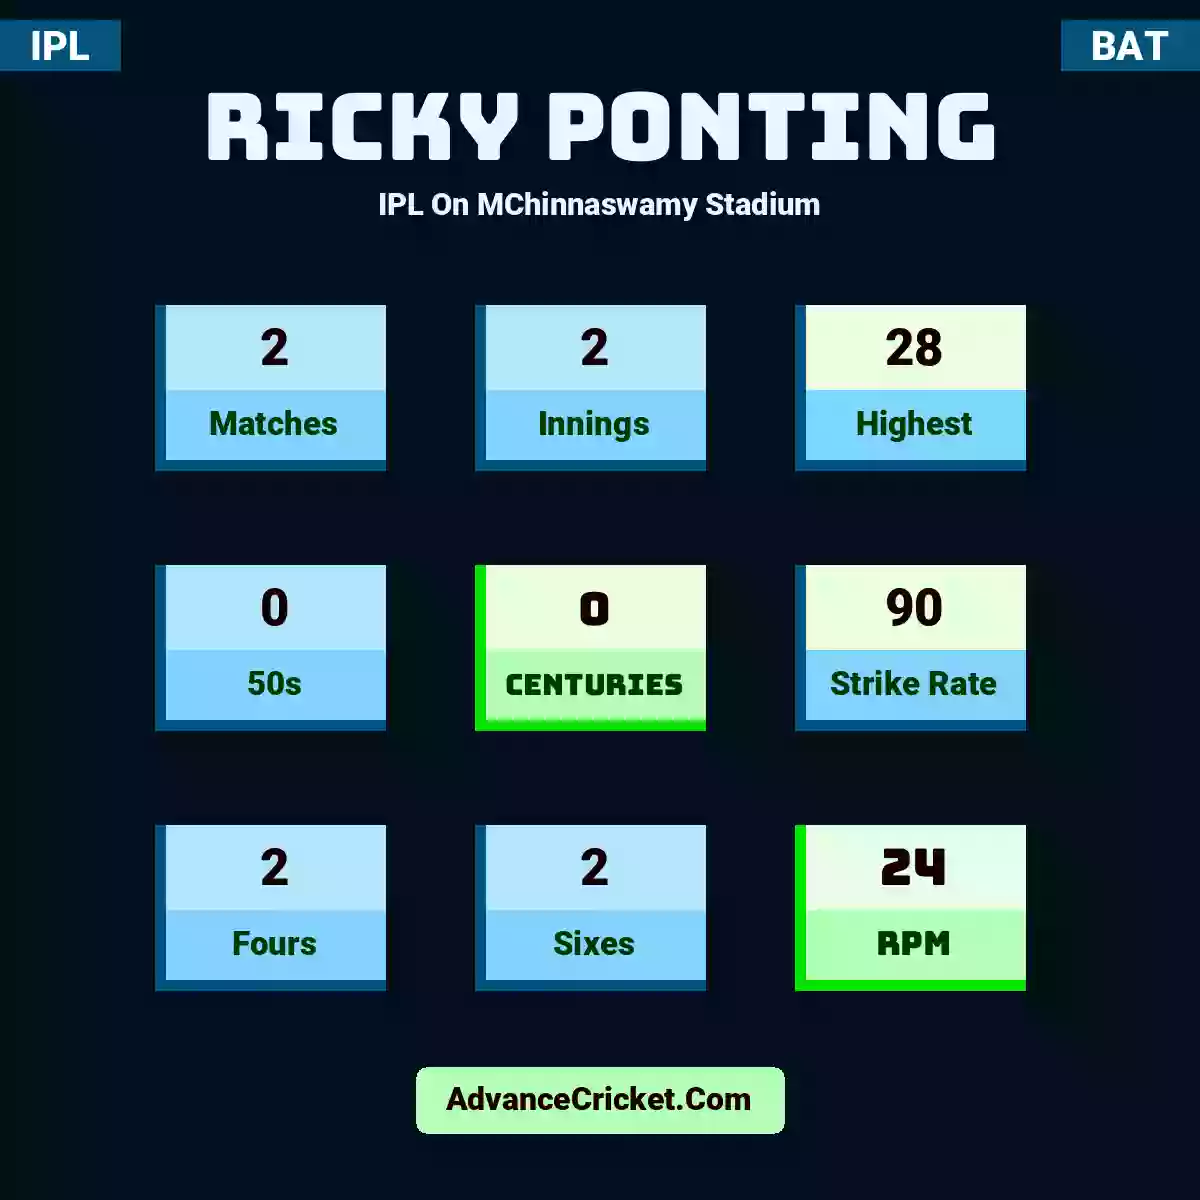 Ricky Ponting IPL  On MChinnaswamy Stadium, Ricky Ponting played 2 matches, scored 28 runs as highest, 0 half-centuries, and 0 centuries, with a strike rate of 90. R.Ponting hit 2 fours and 2 sixes, with an RPM of 24.